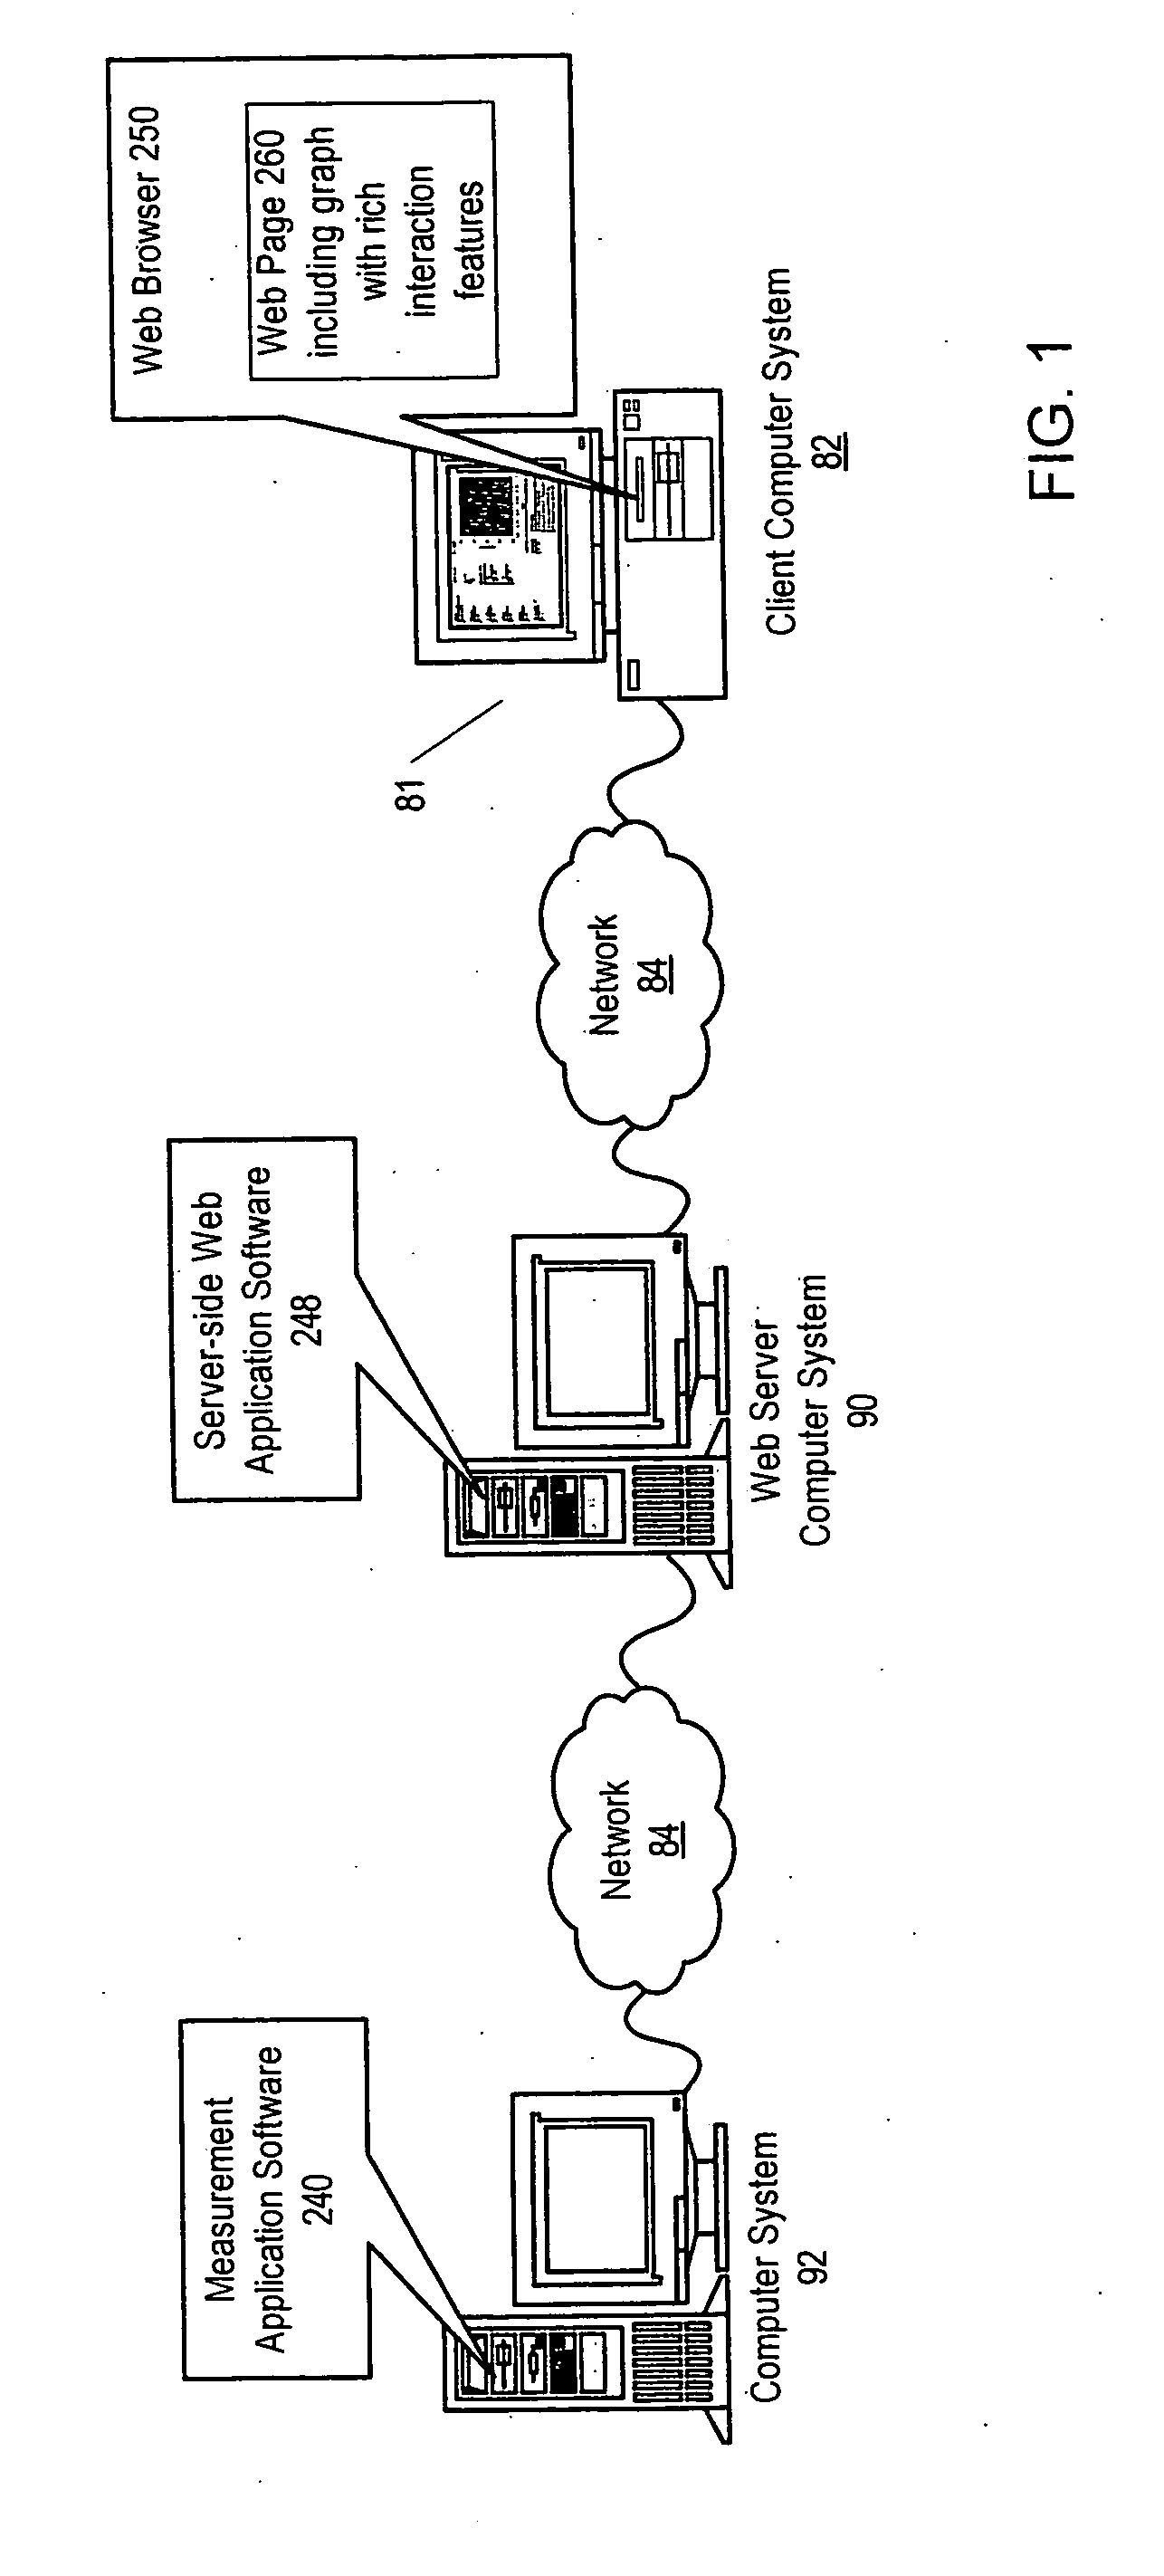 Simultaneous update of a plurality of user interface elements displayed in a web browser